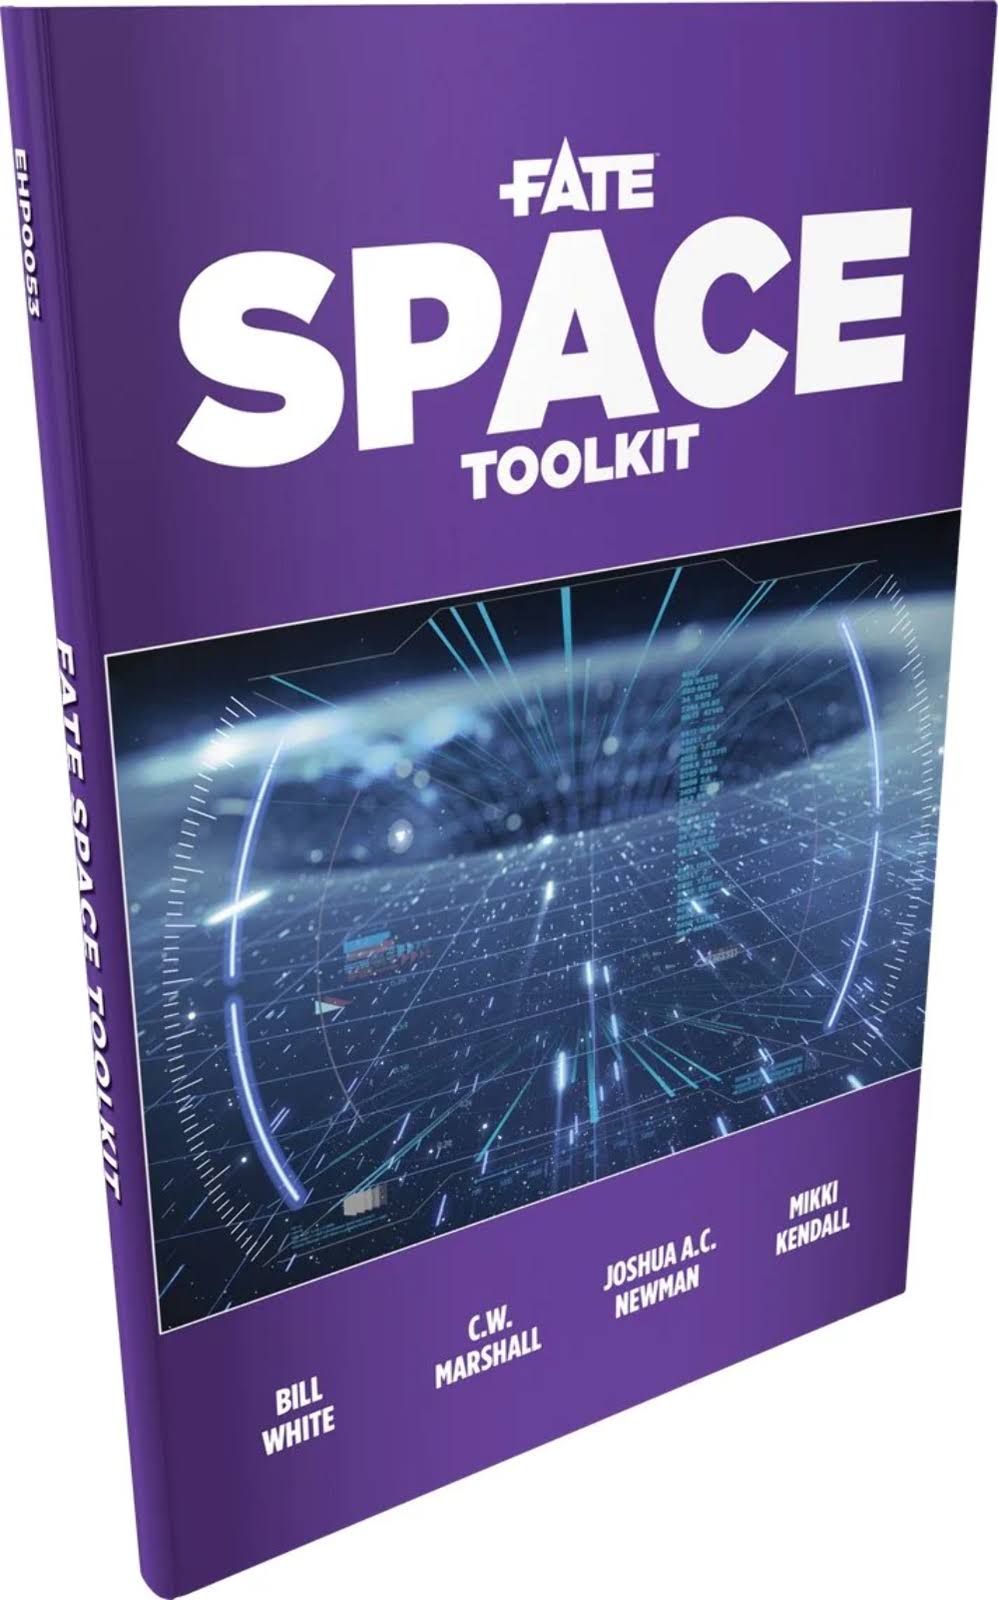 Fate Space Toolkit [Book]